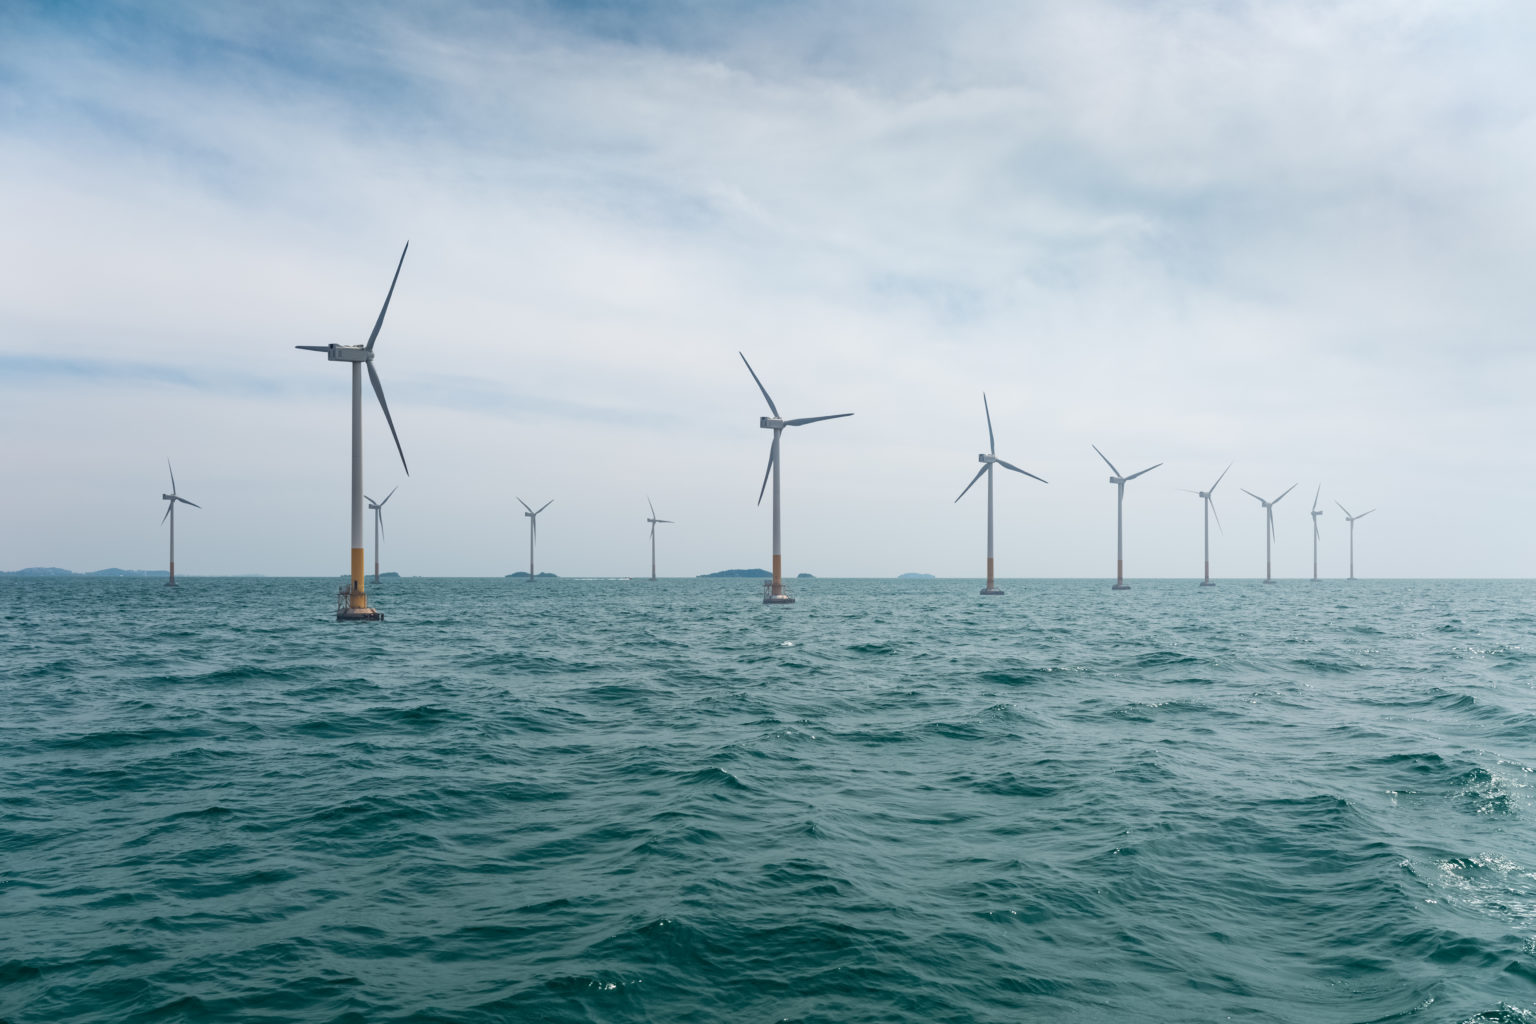 Scottish Renewables' Offshore Wind Conference 2023 returns to Glasgow